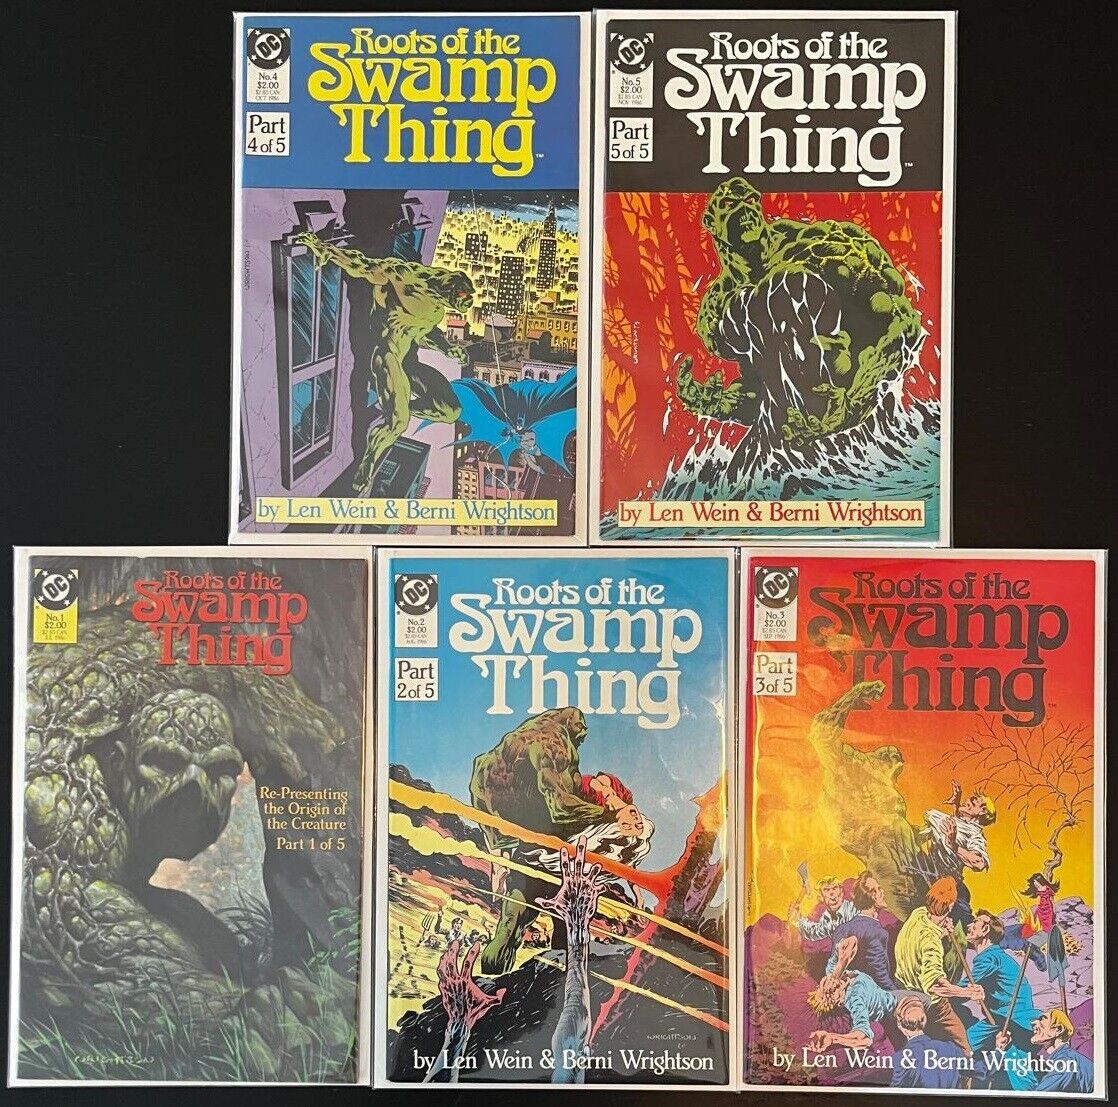 ROOTS OF THE SWAMP THING #1-5 Full Set, DC Comics, Bernie Wrightson, Len Wein